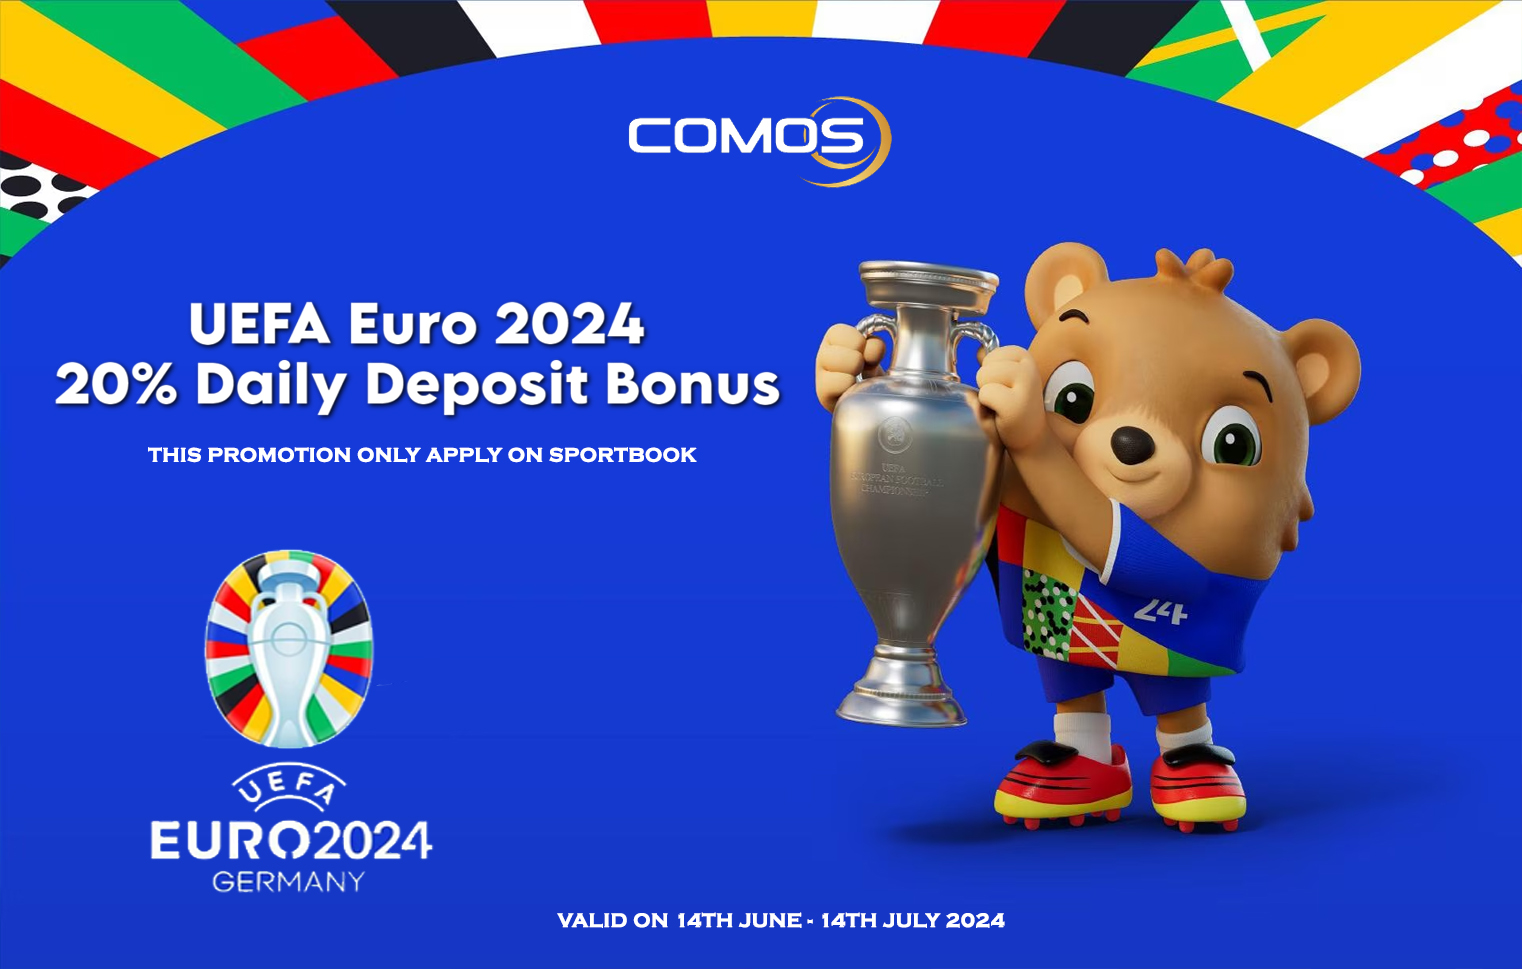 UEFA Euro 2024 20% Daily Deposit Bonus This Promotion Only For Sportbook  ( Valid On 14th June - 14th July 2024 )